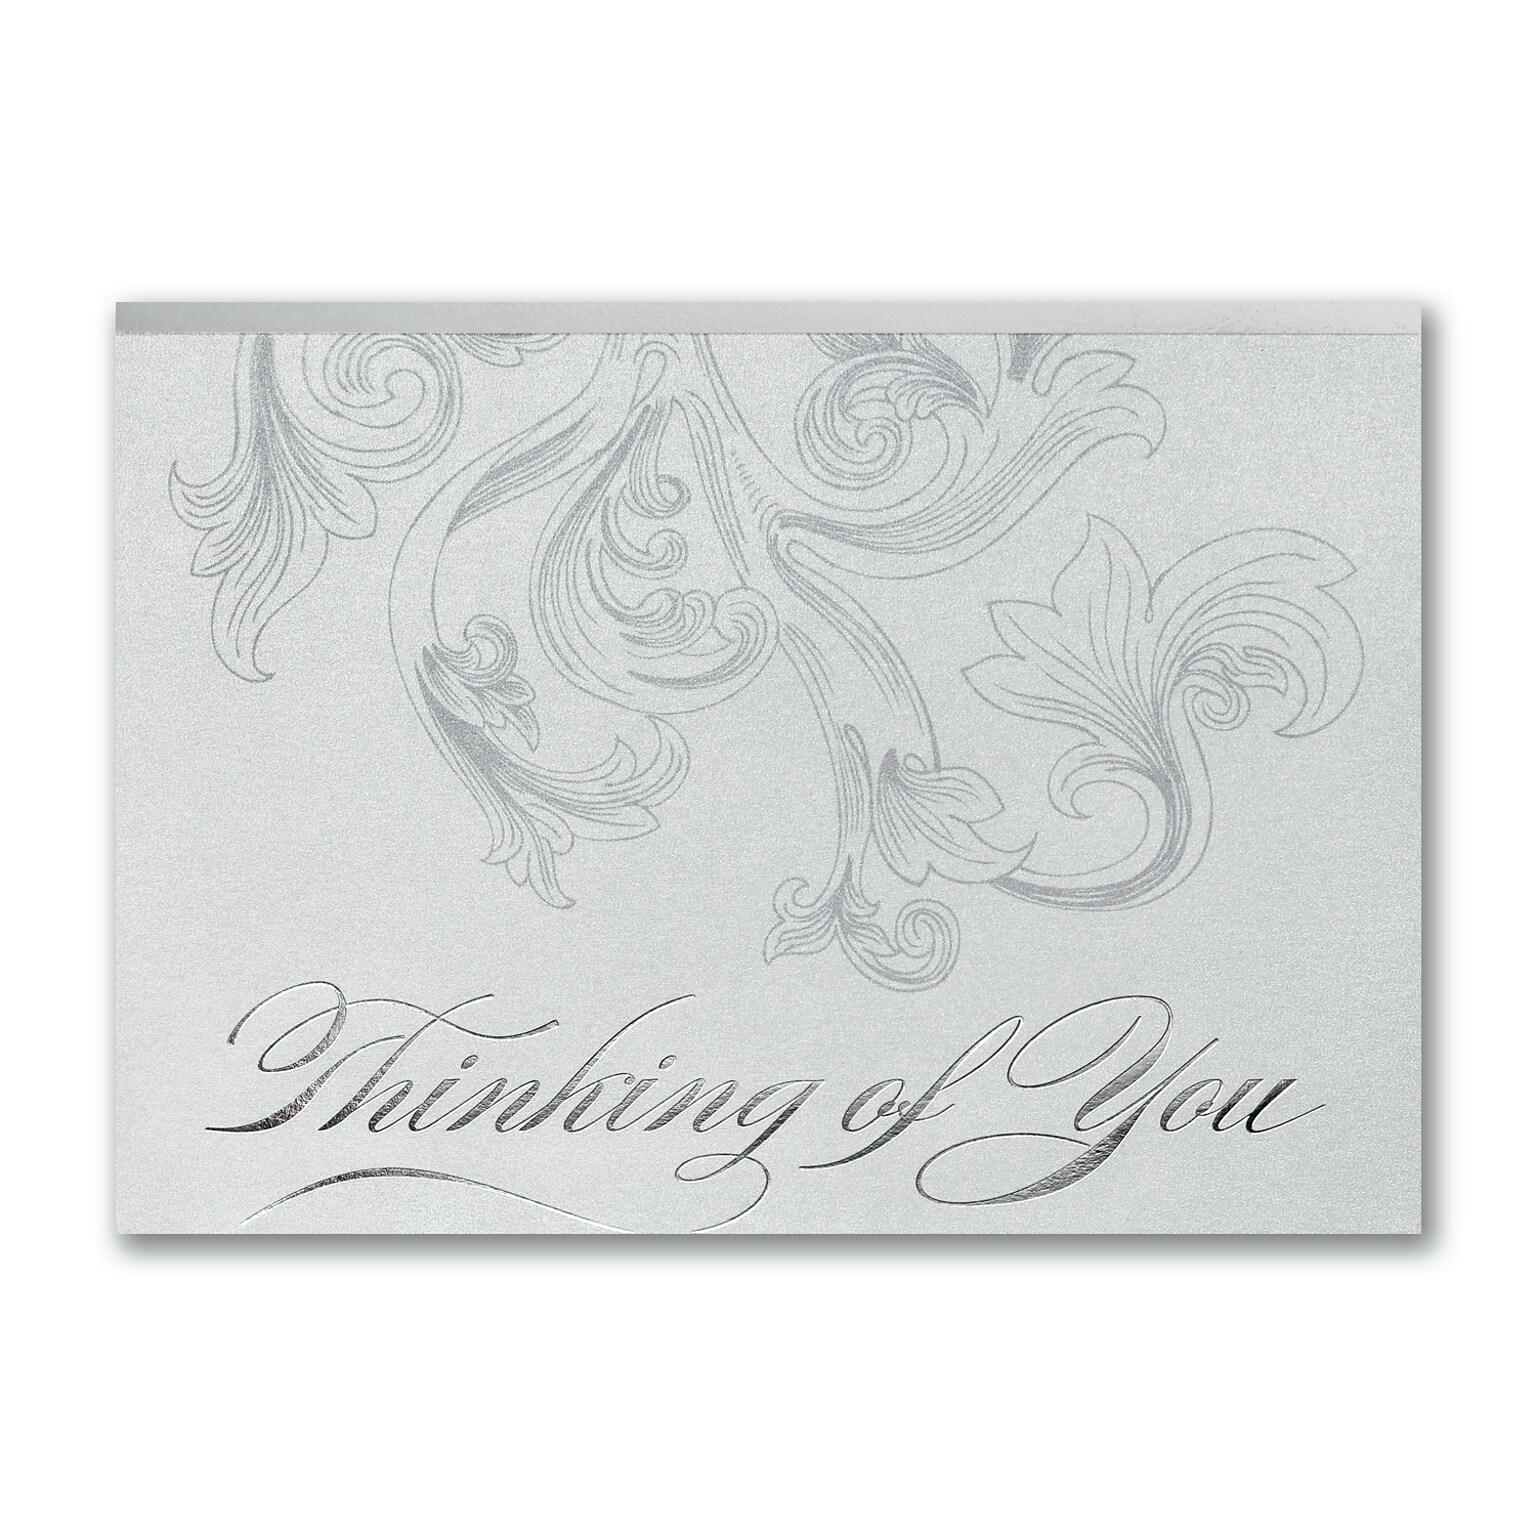 Custom Thinking of You Filigree Thinking of You Cards, With Envelopes, 7-7/8 x 5-5/8, 25 Cards per Set